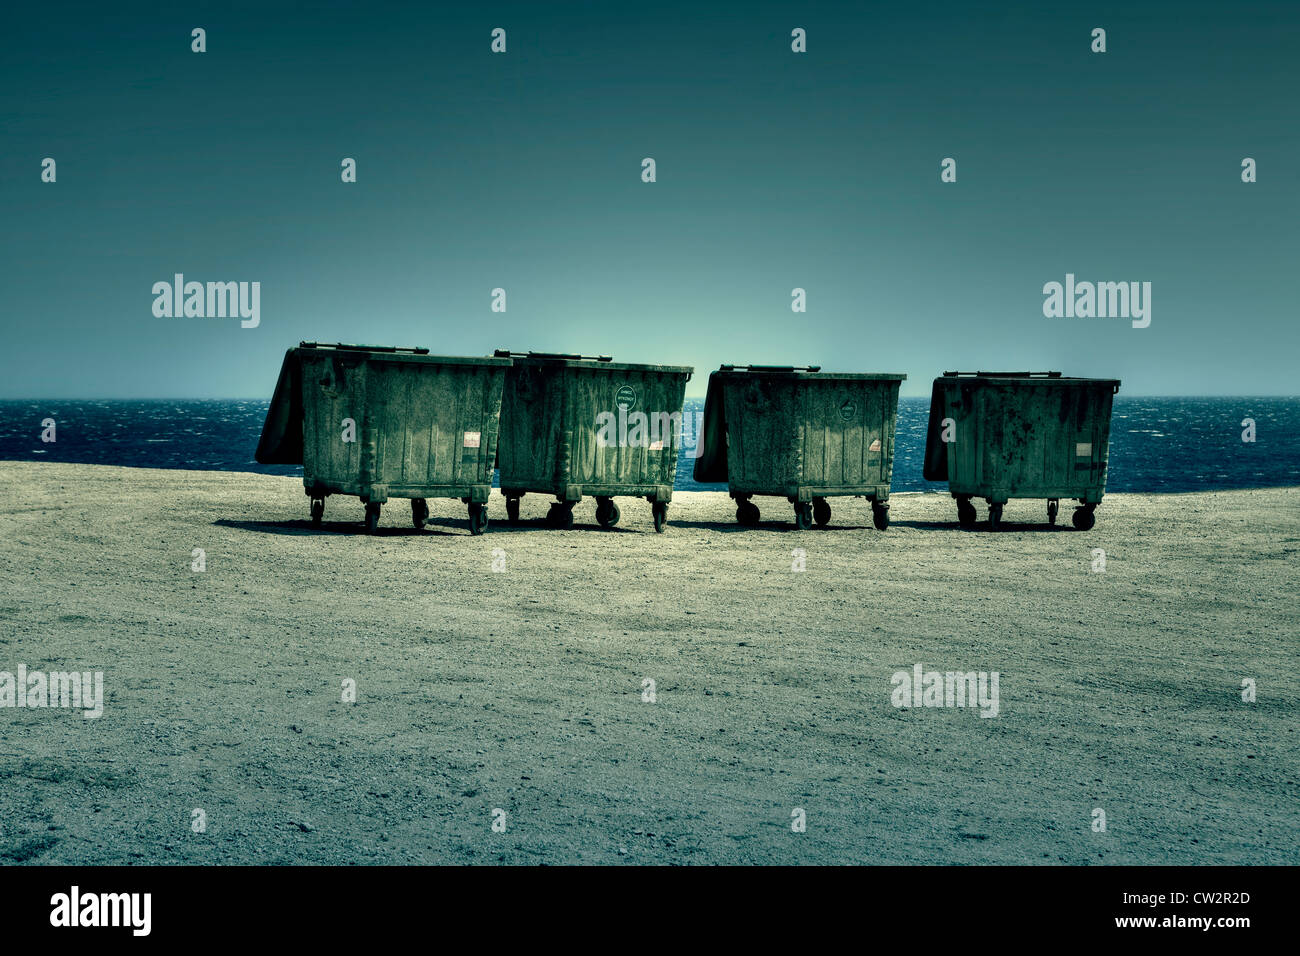 four dumpsters on the shores of the Sea Stock Photo